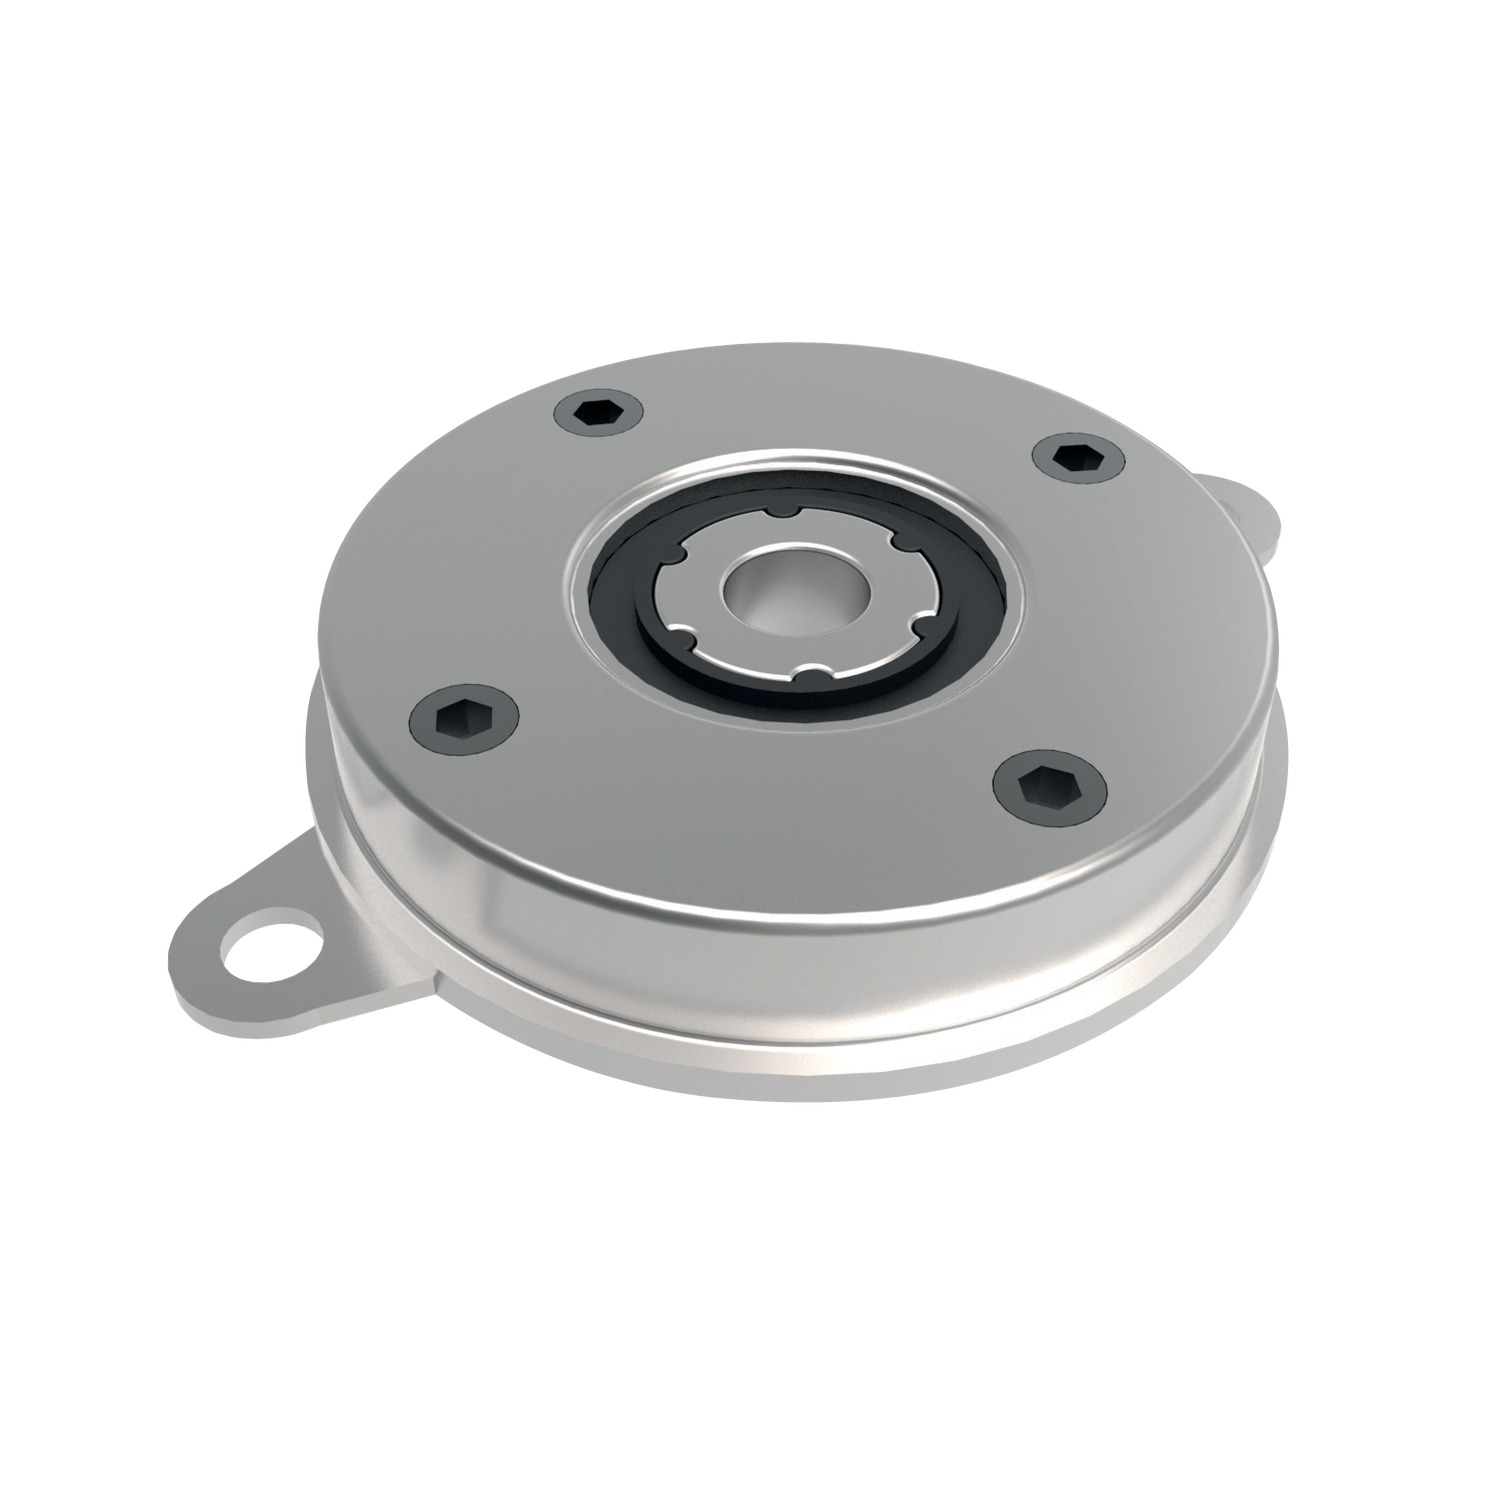 Q3260.AC0163 Disk Dampers - Steel. 85 - Counter Clockwise - 10 - 0,12